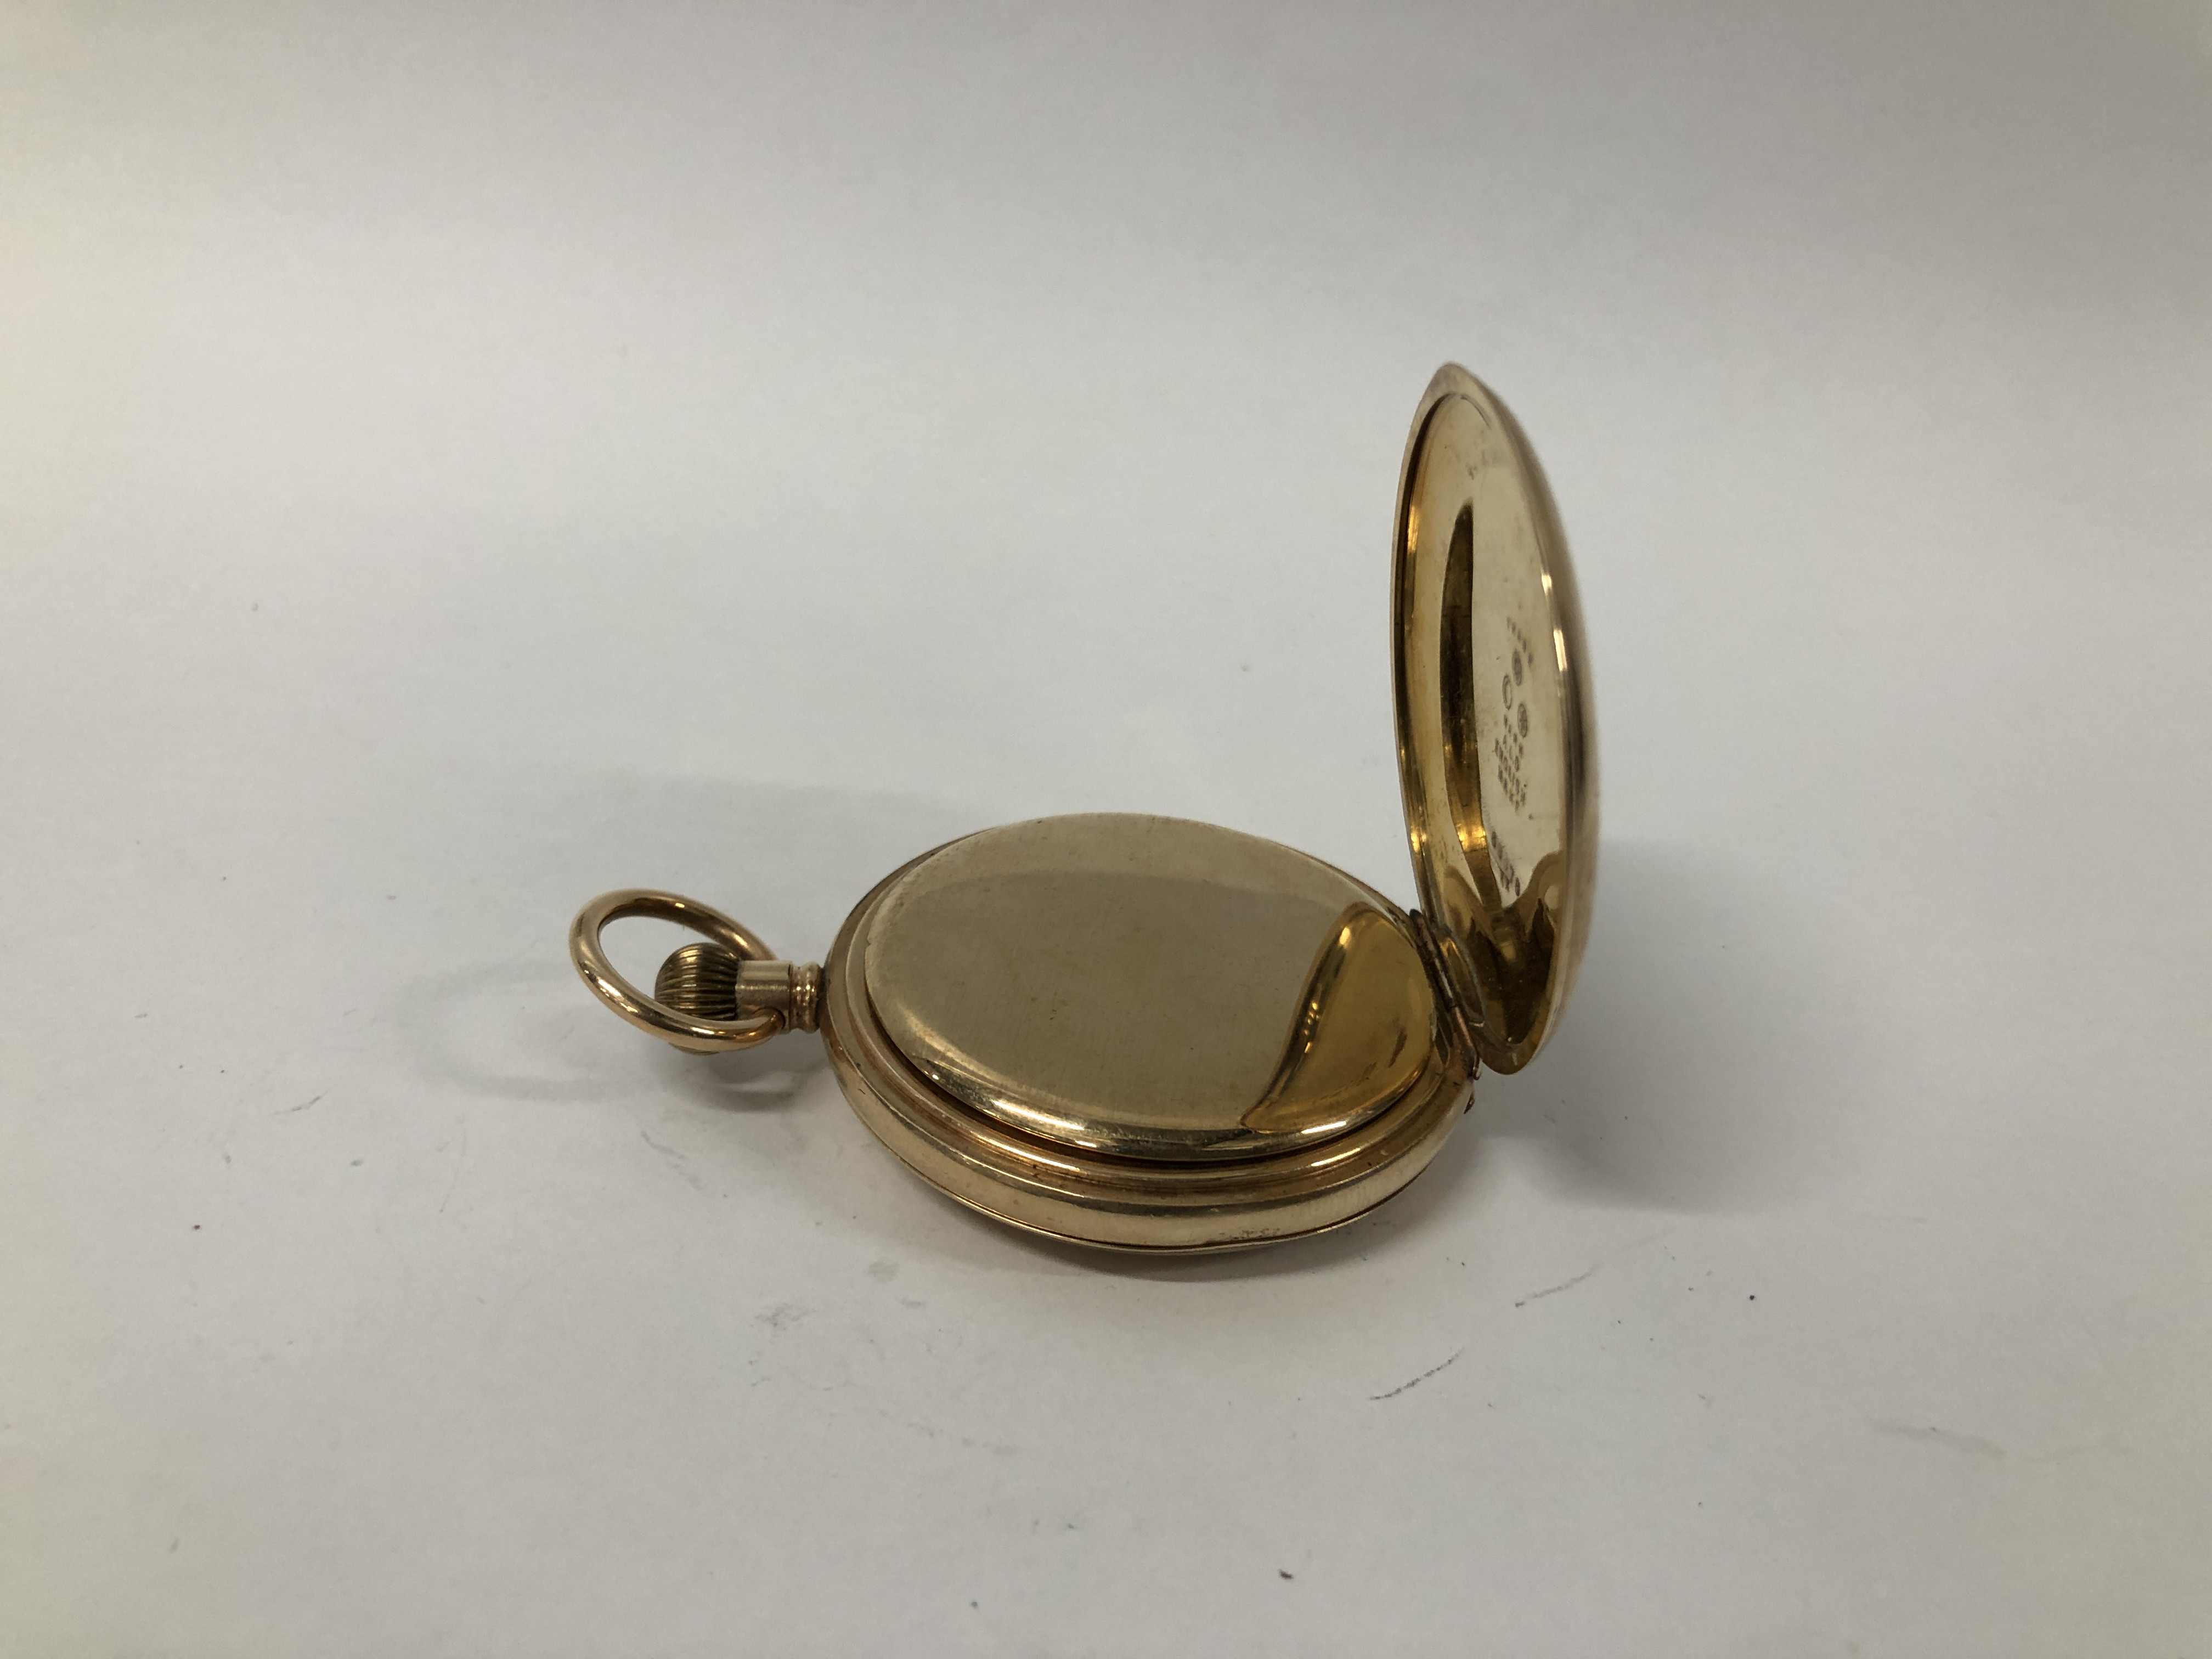 A VINTAGE GOLD PLATED "WALTHAM MASS" POCKET WATCH WITH ENAMELLED DIAL - Image 8 of 8